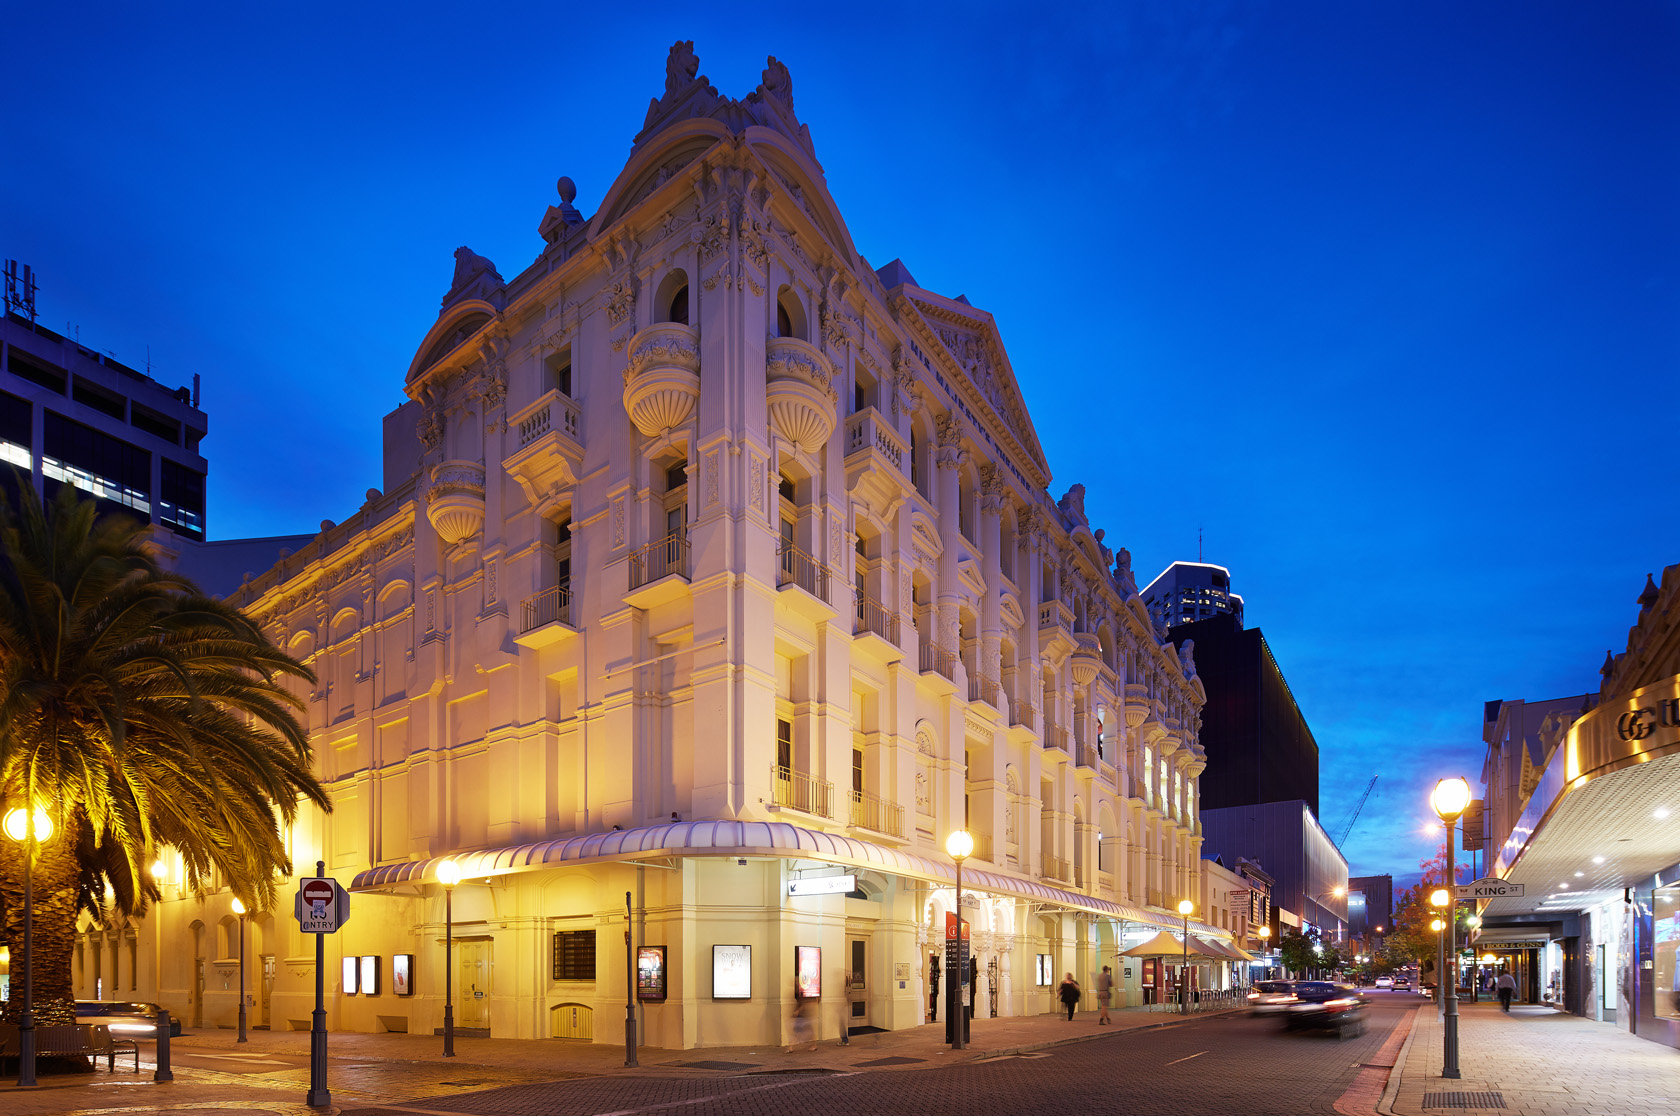 His Majesty's Theatre exterior at night